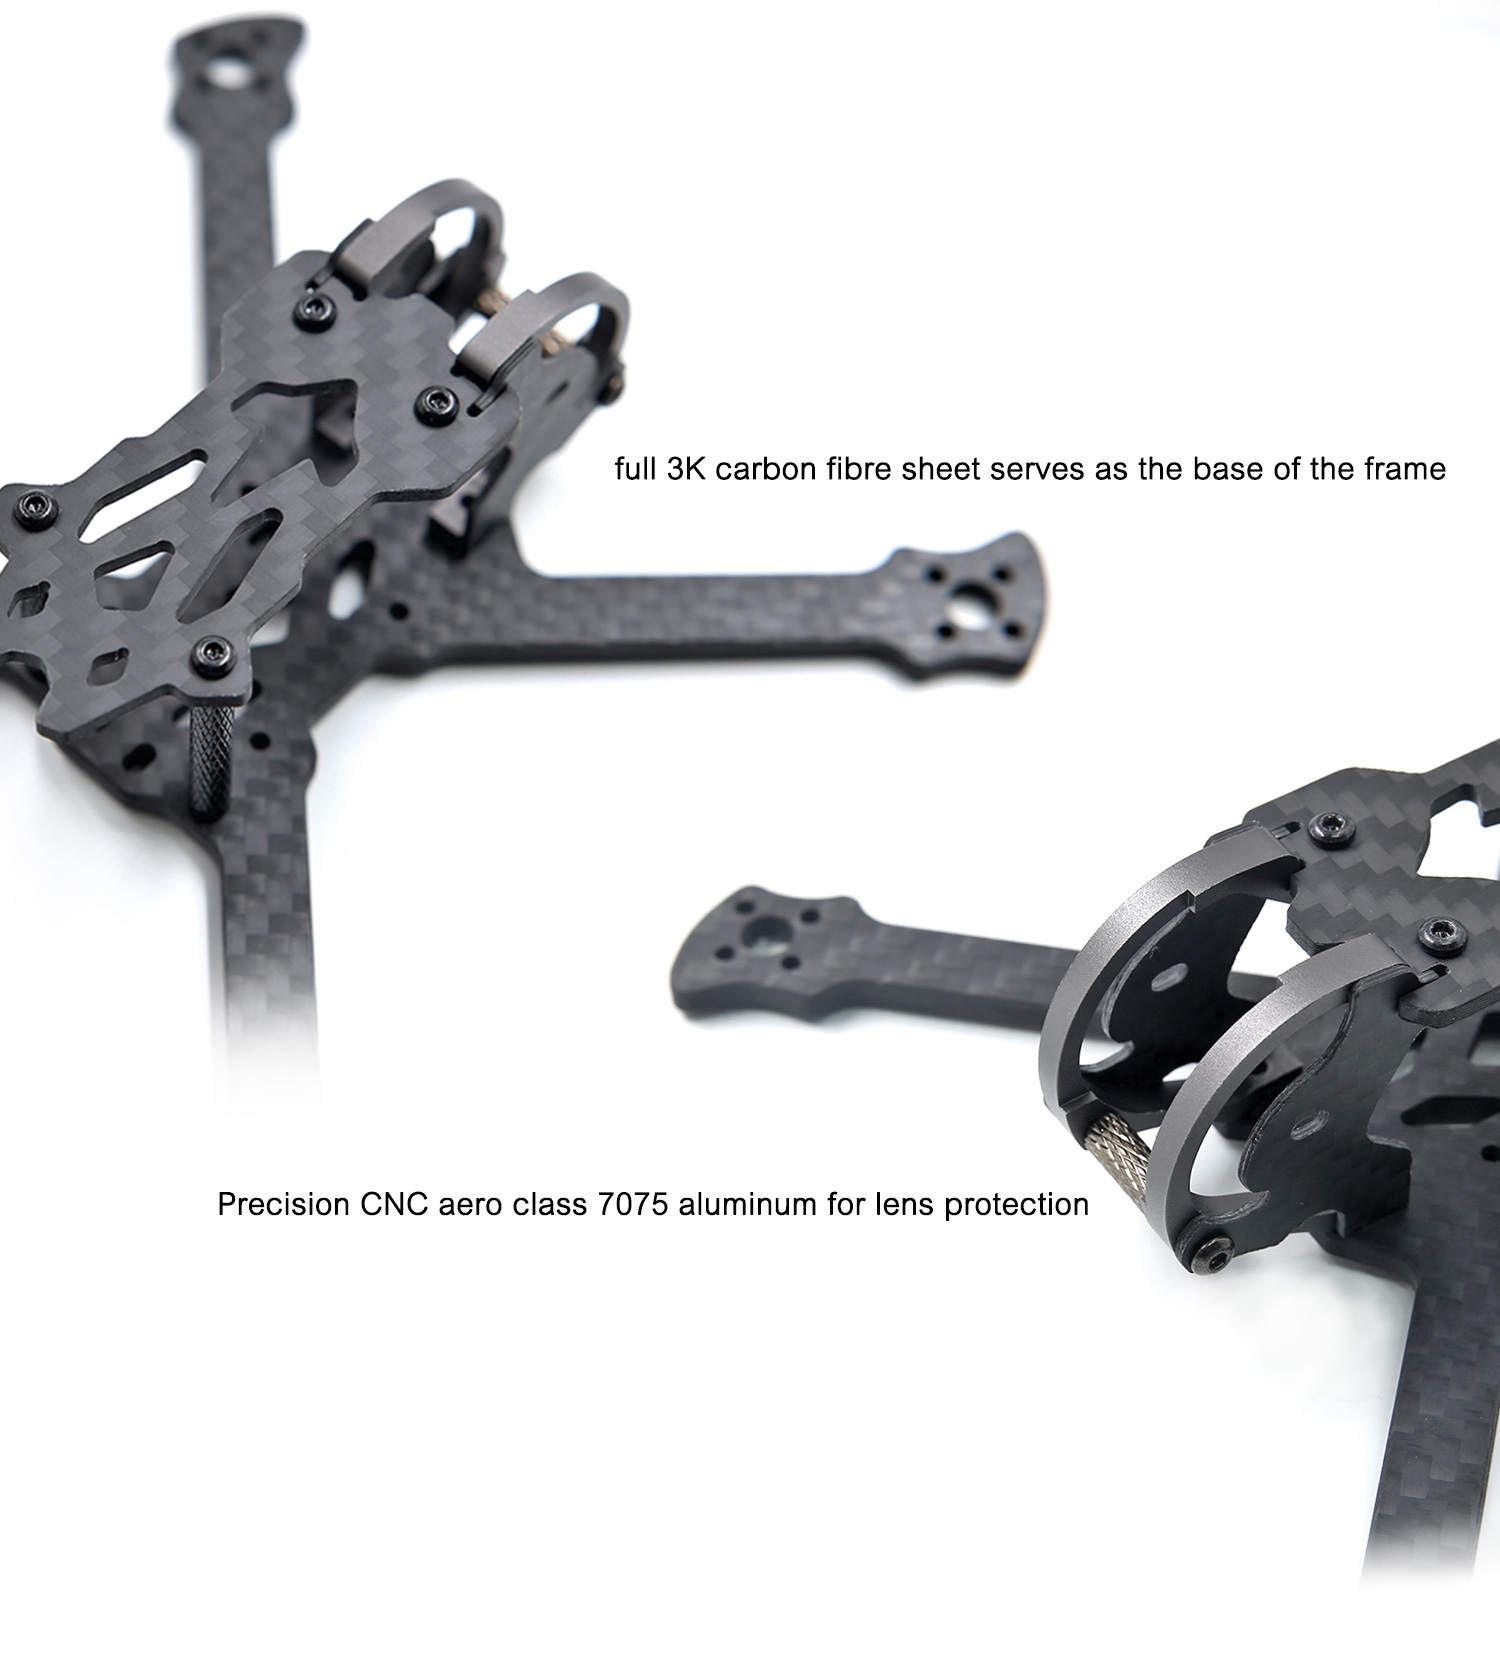 GEPRC GEP-PX3 3 Inch 140mm Wheelbase 3mm Arm 3K Carbon Fiber Frame Kit for RC Drone FPV Racing - Photo: 3